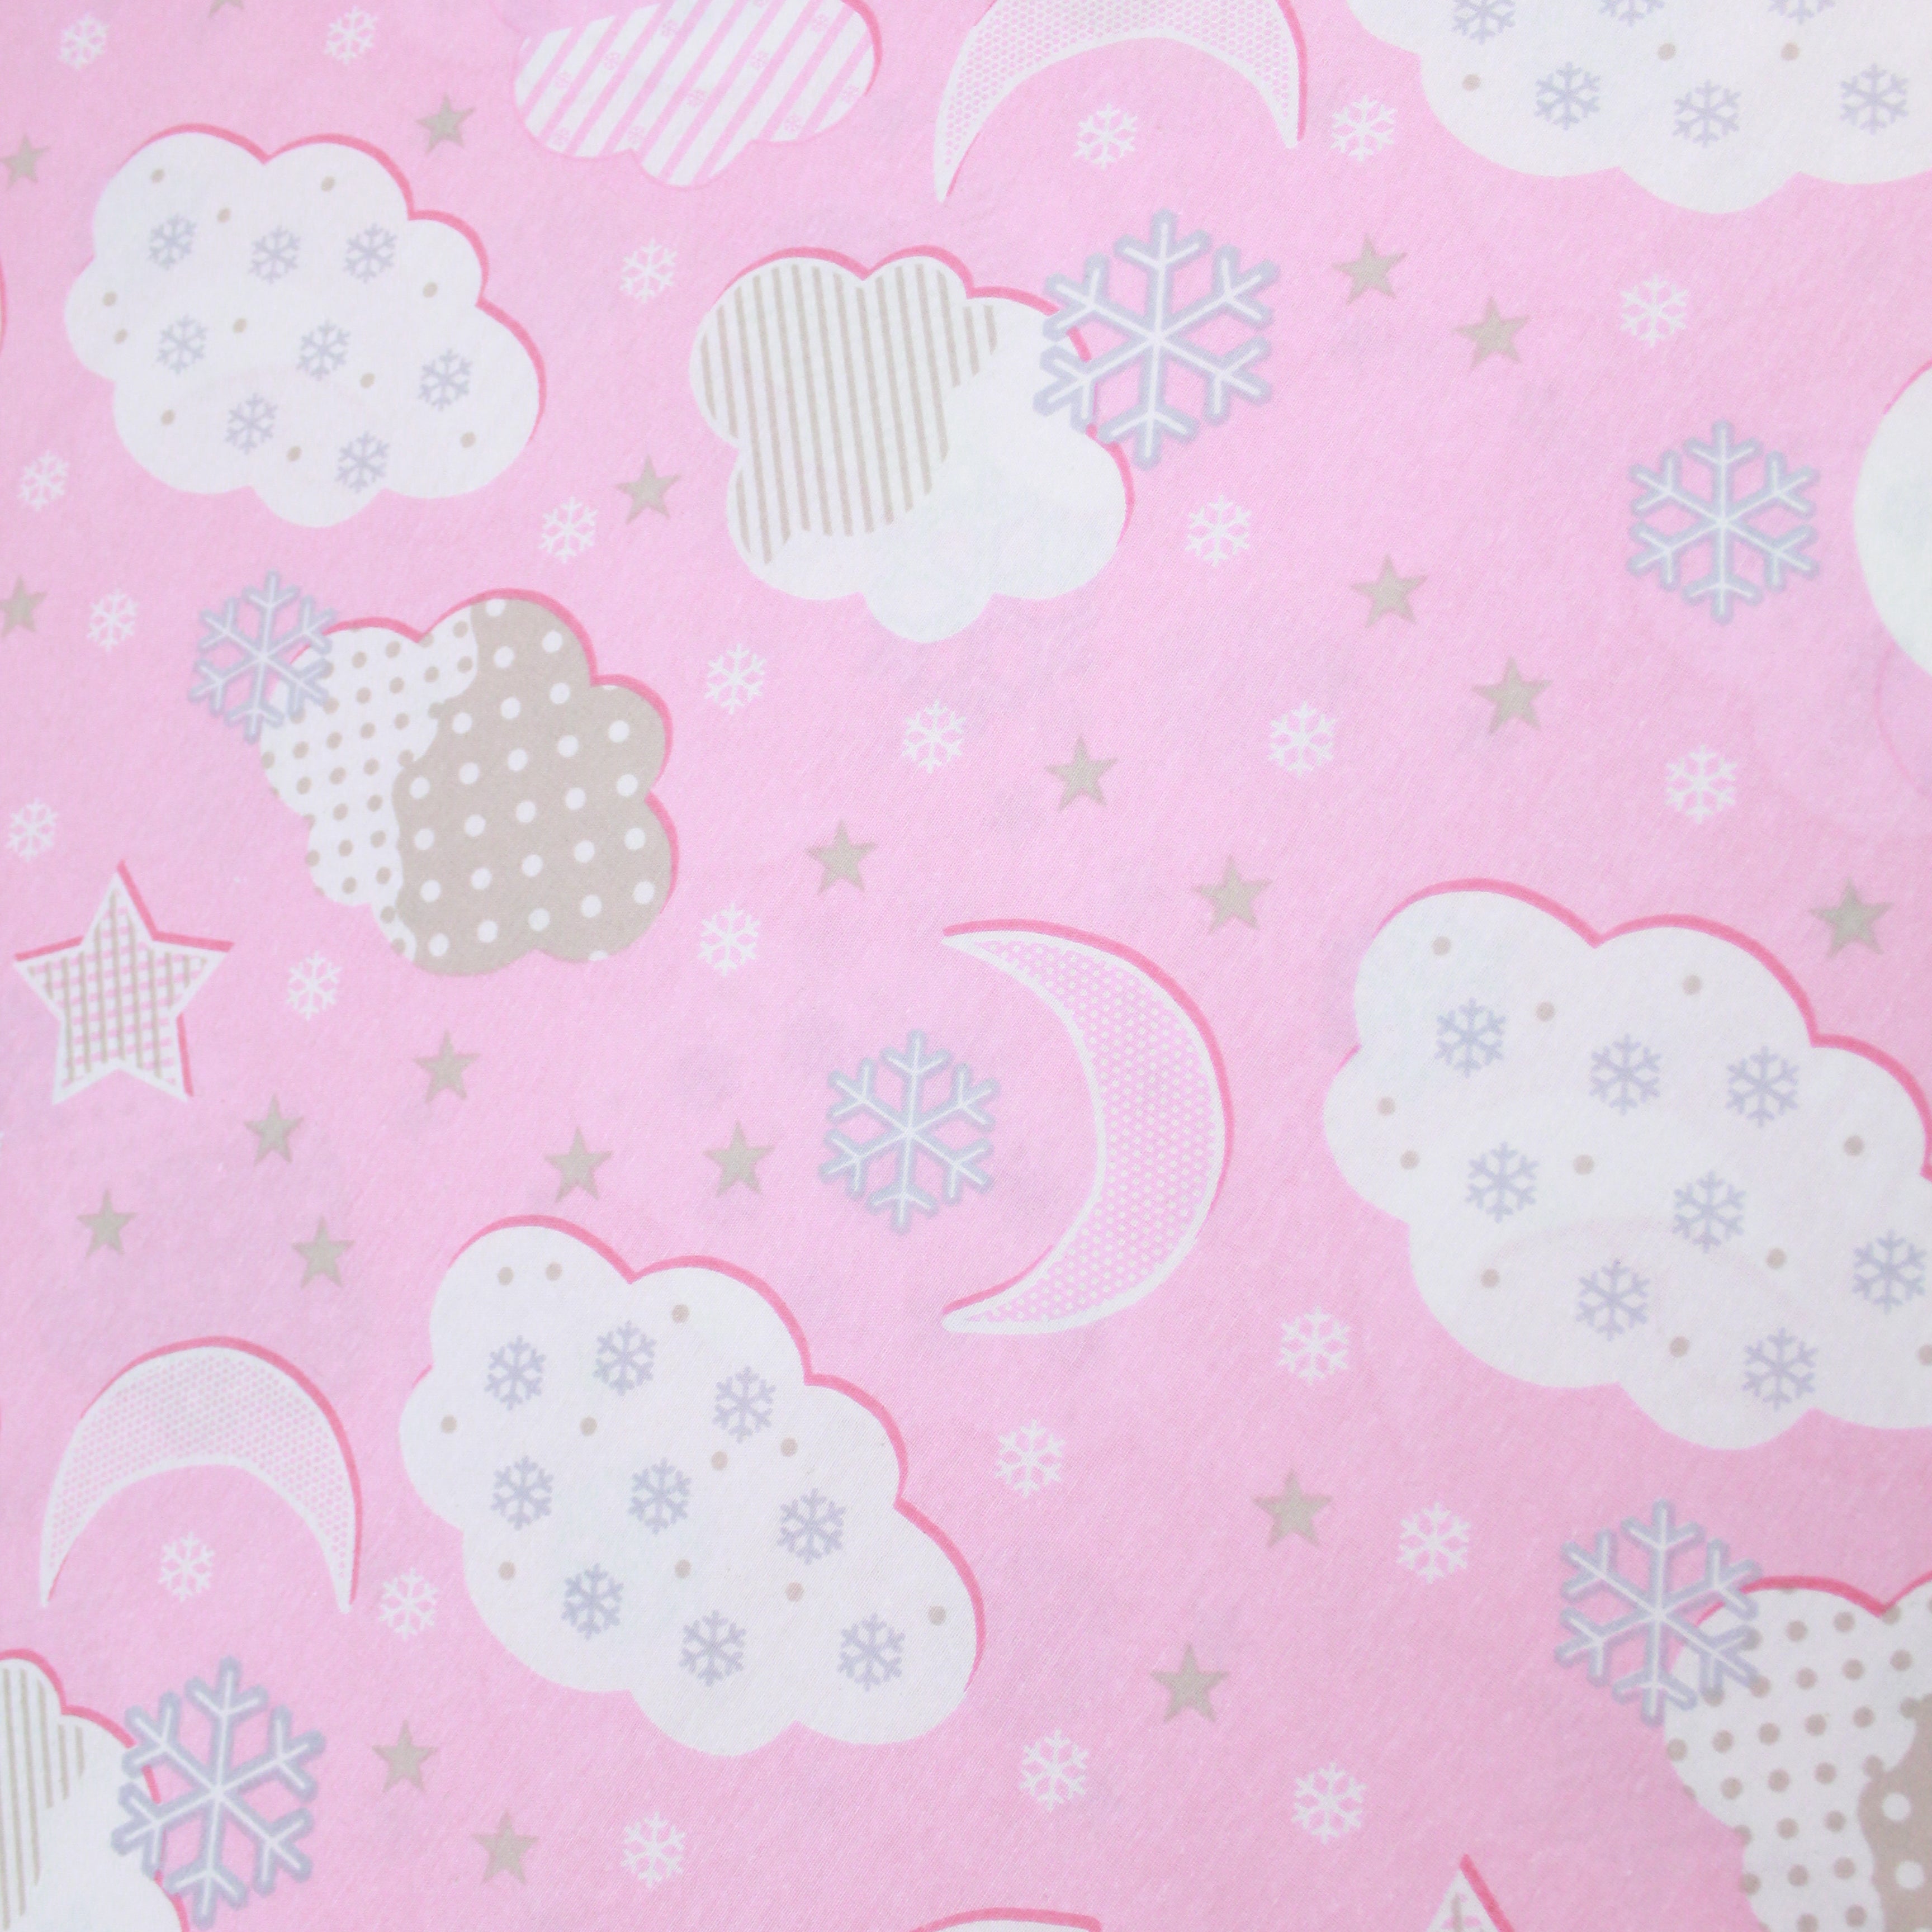 Premium Quality Super Wide Cotton Blend Sheeting "Moon & Snowflake Clouds" 94" Wide Pink